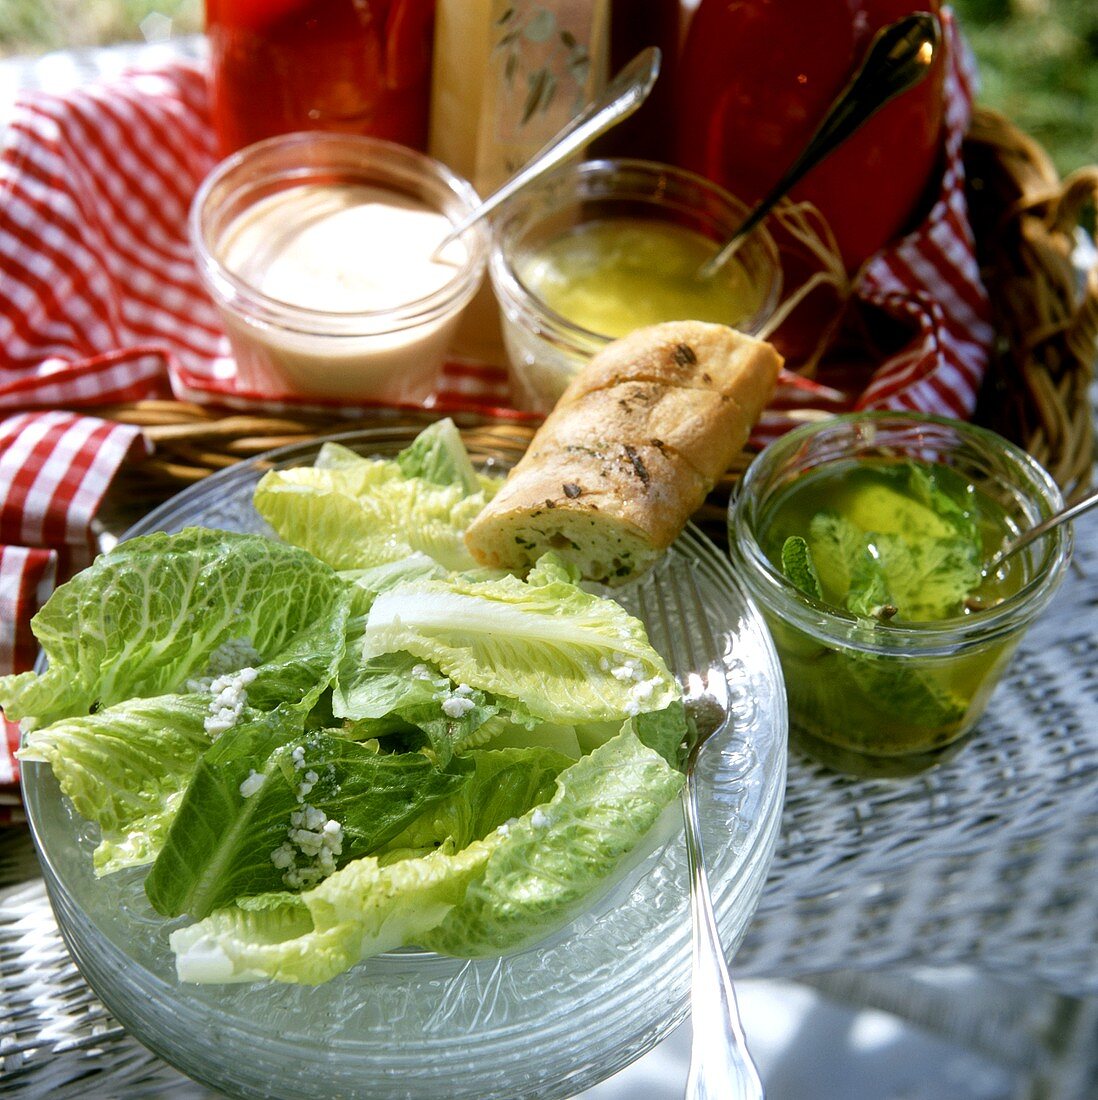 Romaine lettuce with various marinades, dips & sauces